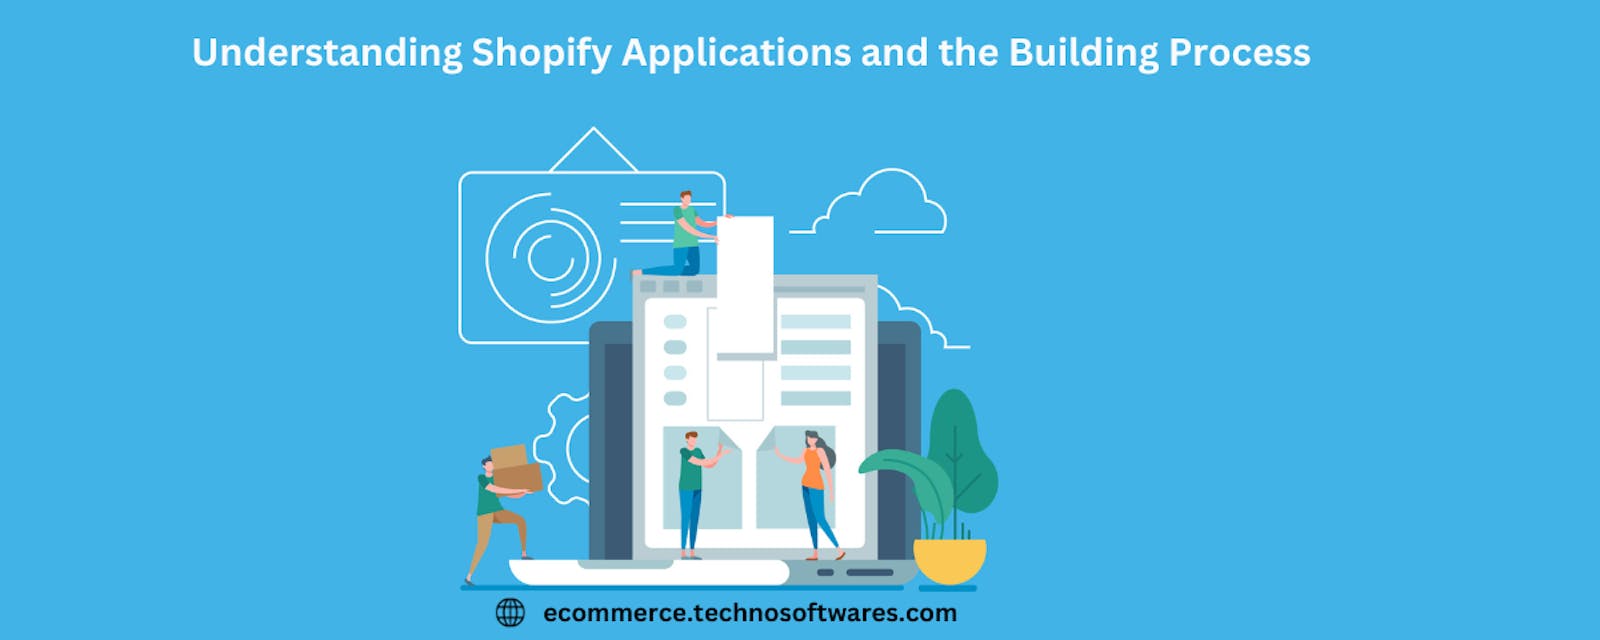 Understanding Shopify Applications and the Building Process